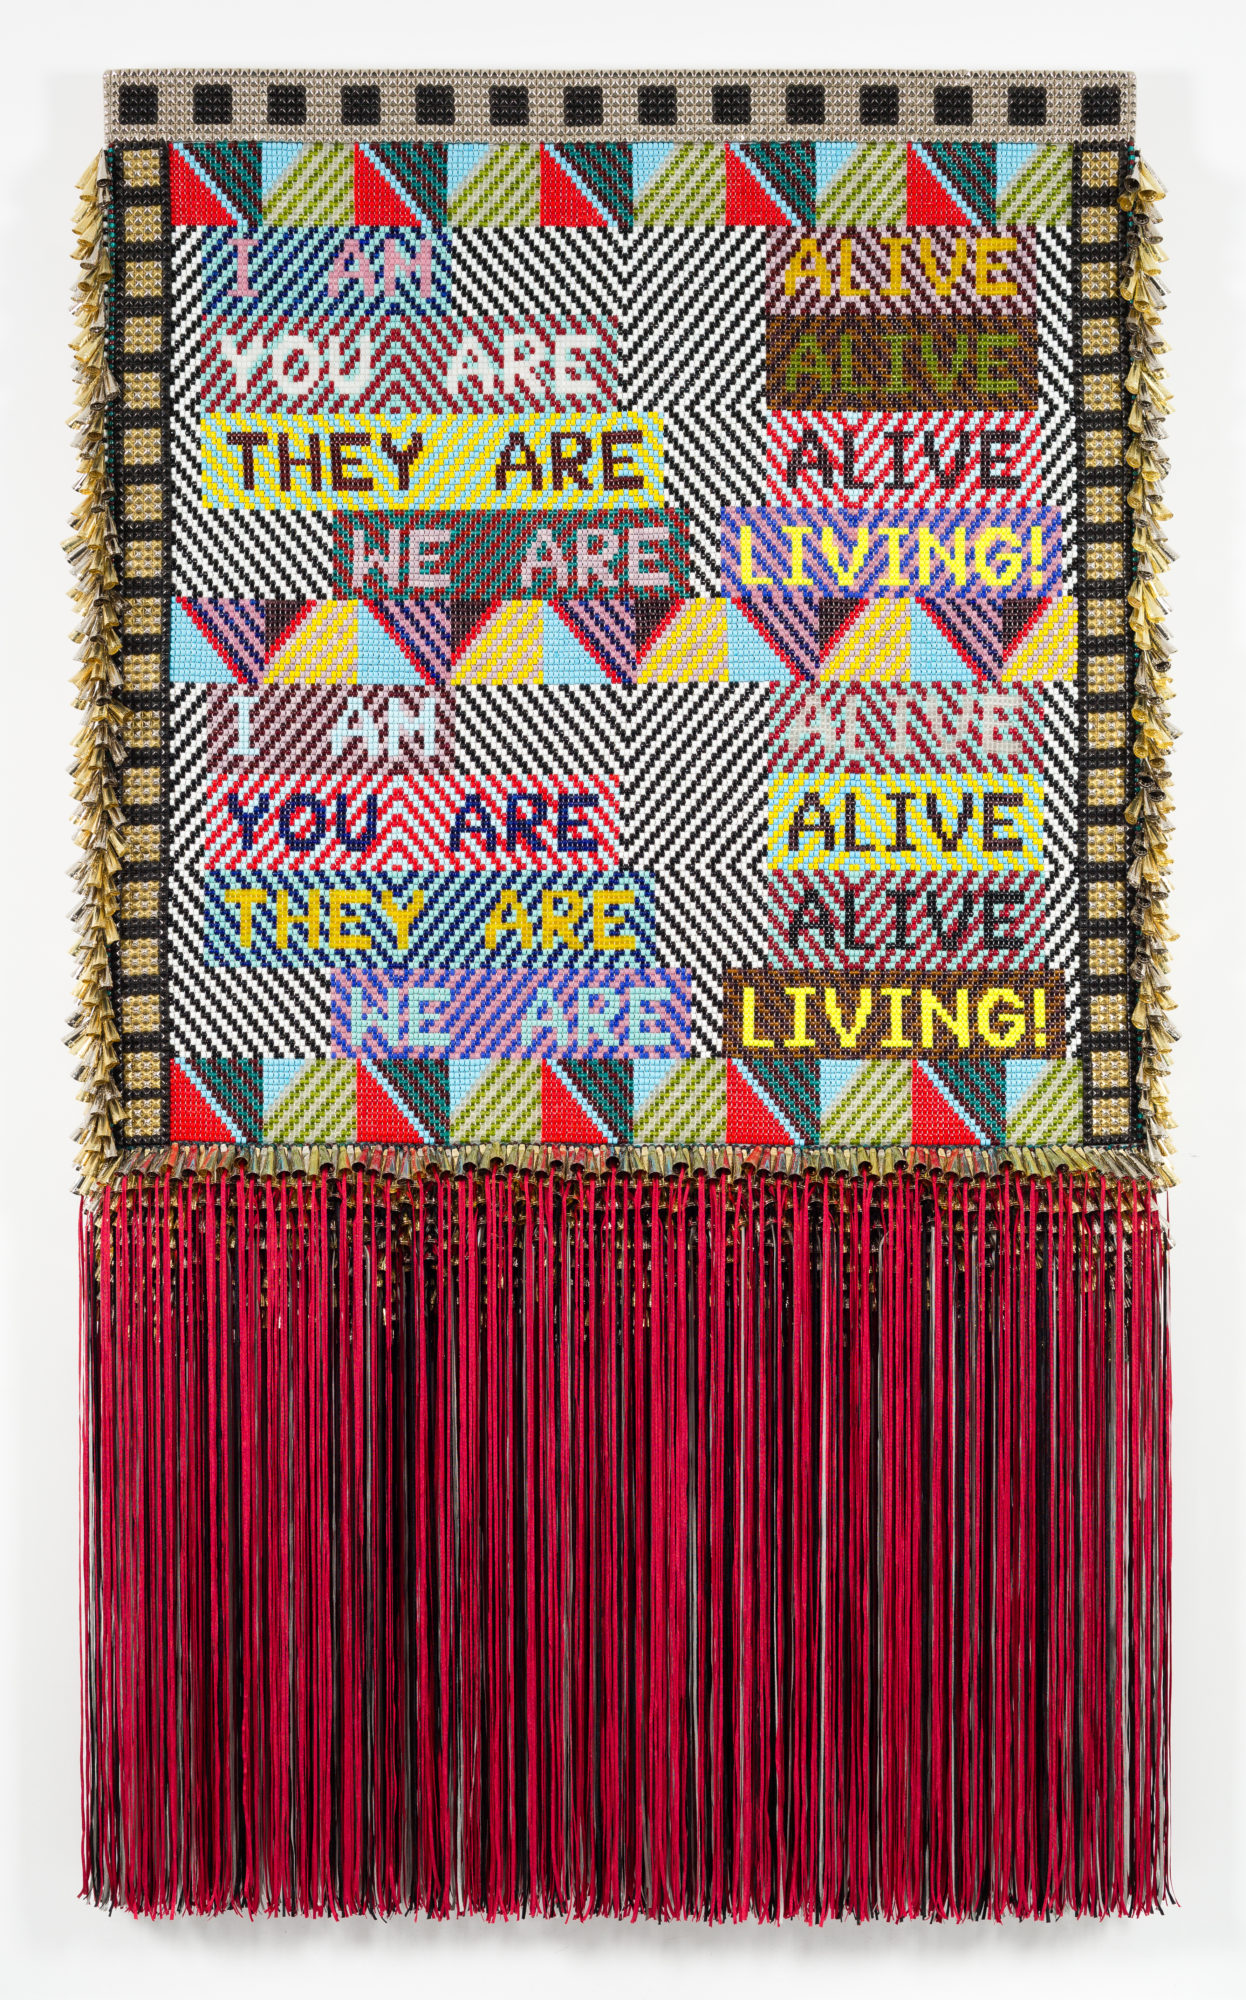 Jeffrey Gibson's art titled ALIVE! covered in colorful beads used to make text, and tin jingles